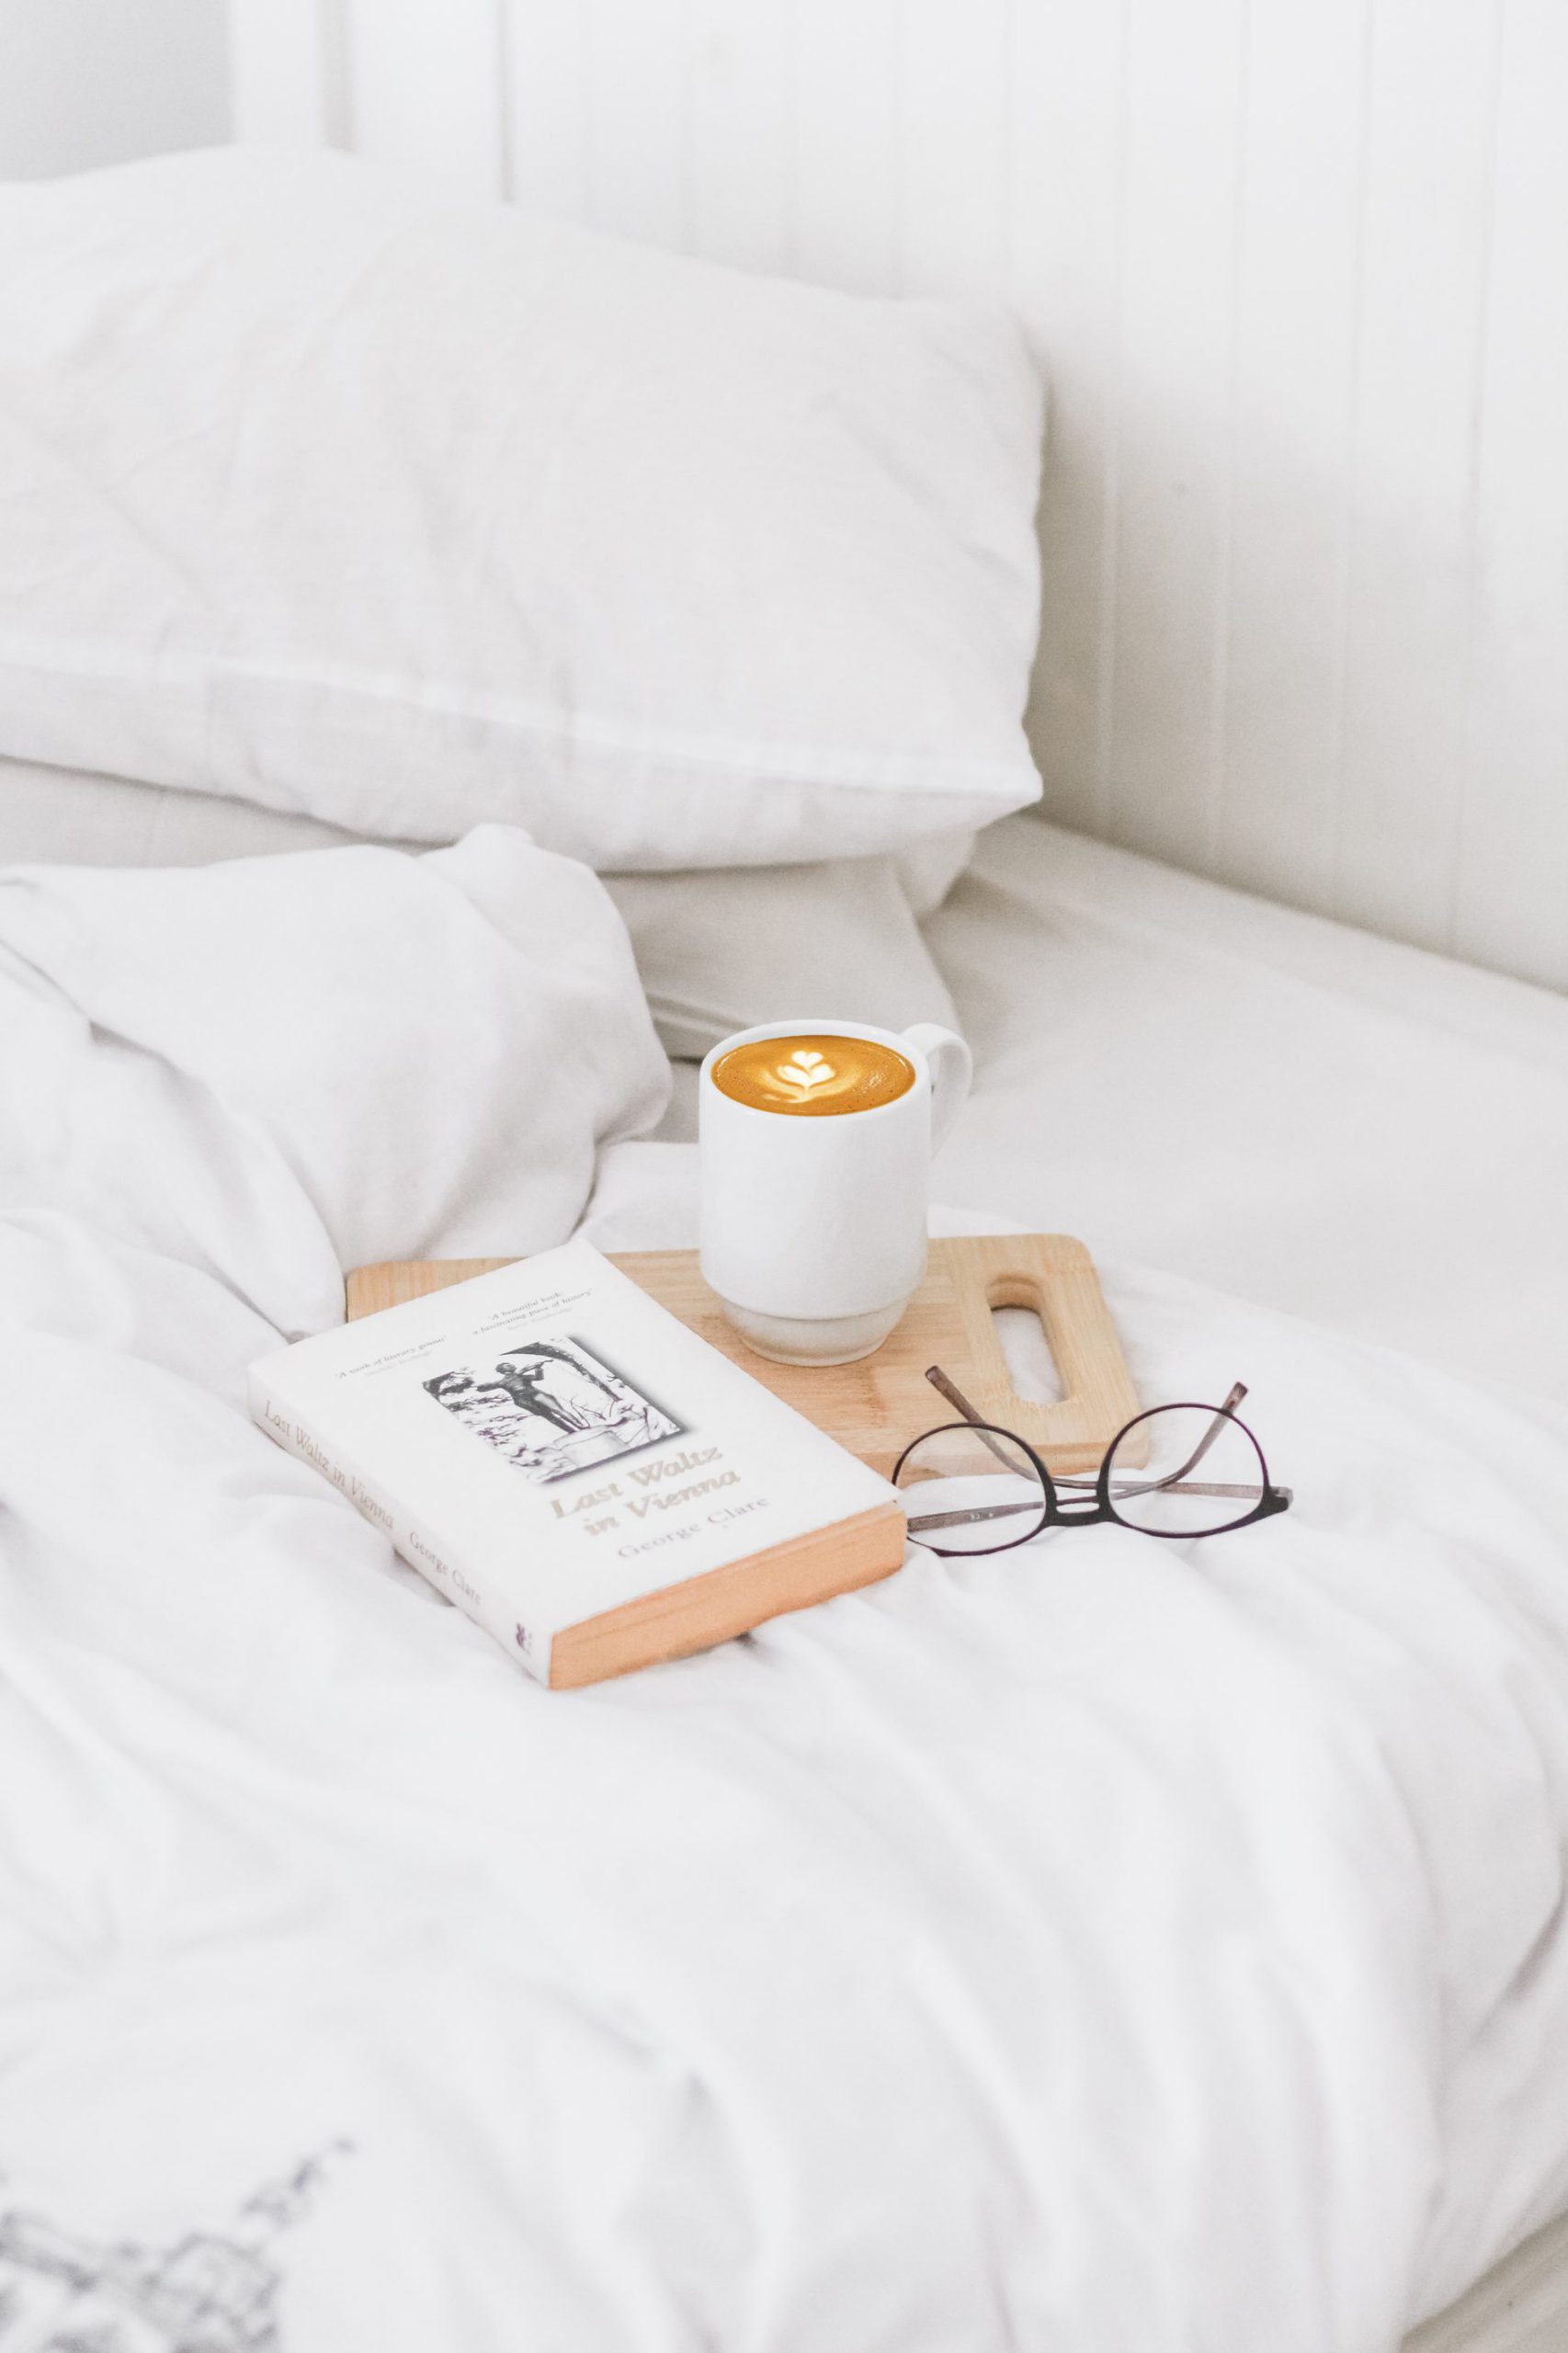 Reading glasses, a book, and a cup of coffee, are placed on a bed, and are ideas for investing in yourself on a relaxing day